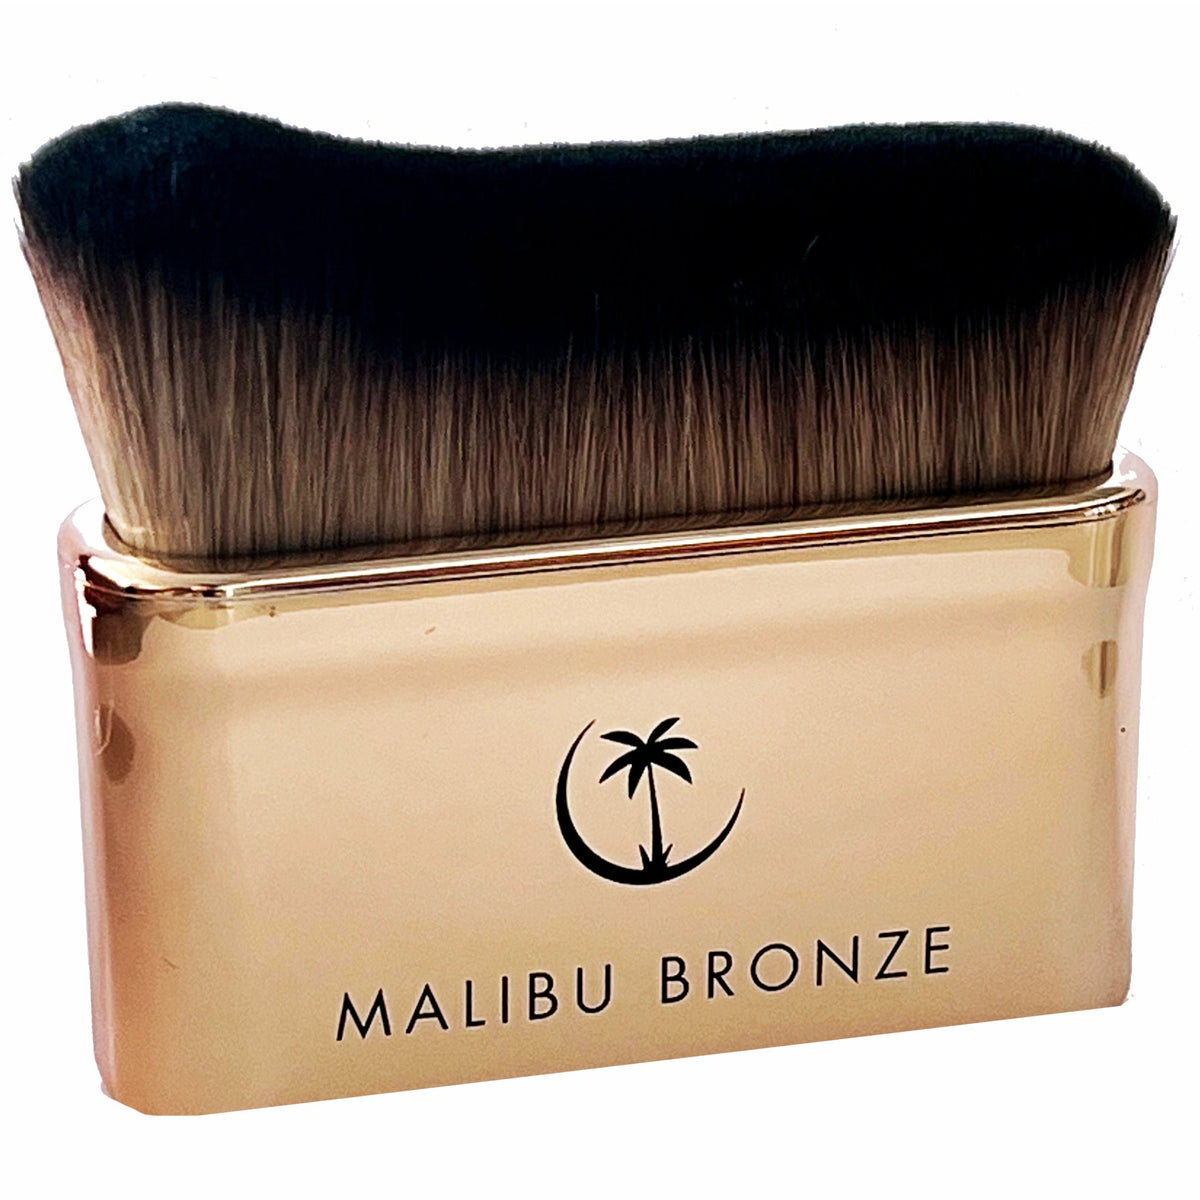 The Malibu Bronze Body Blending Brush used to apply malibu bronze tan foam on body and face to effectively cover all body parts with a beautiful, deep, rich color tan. 